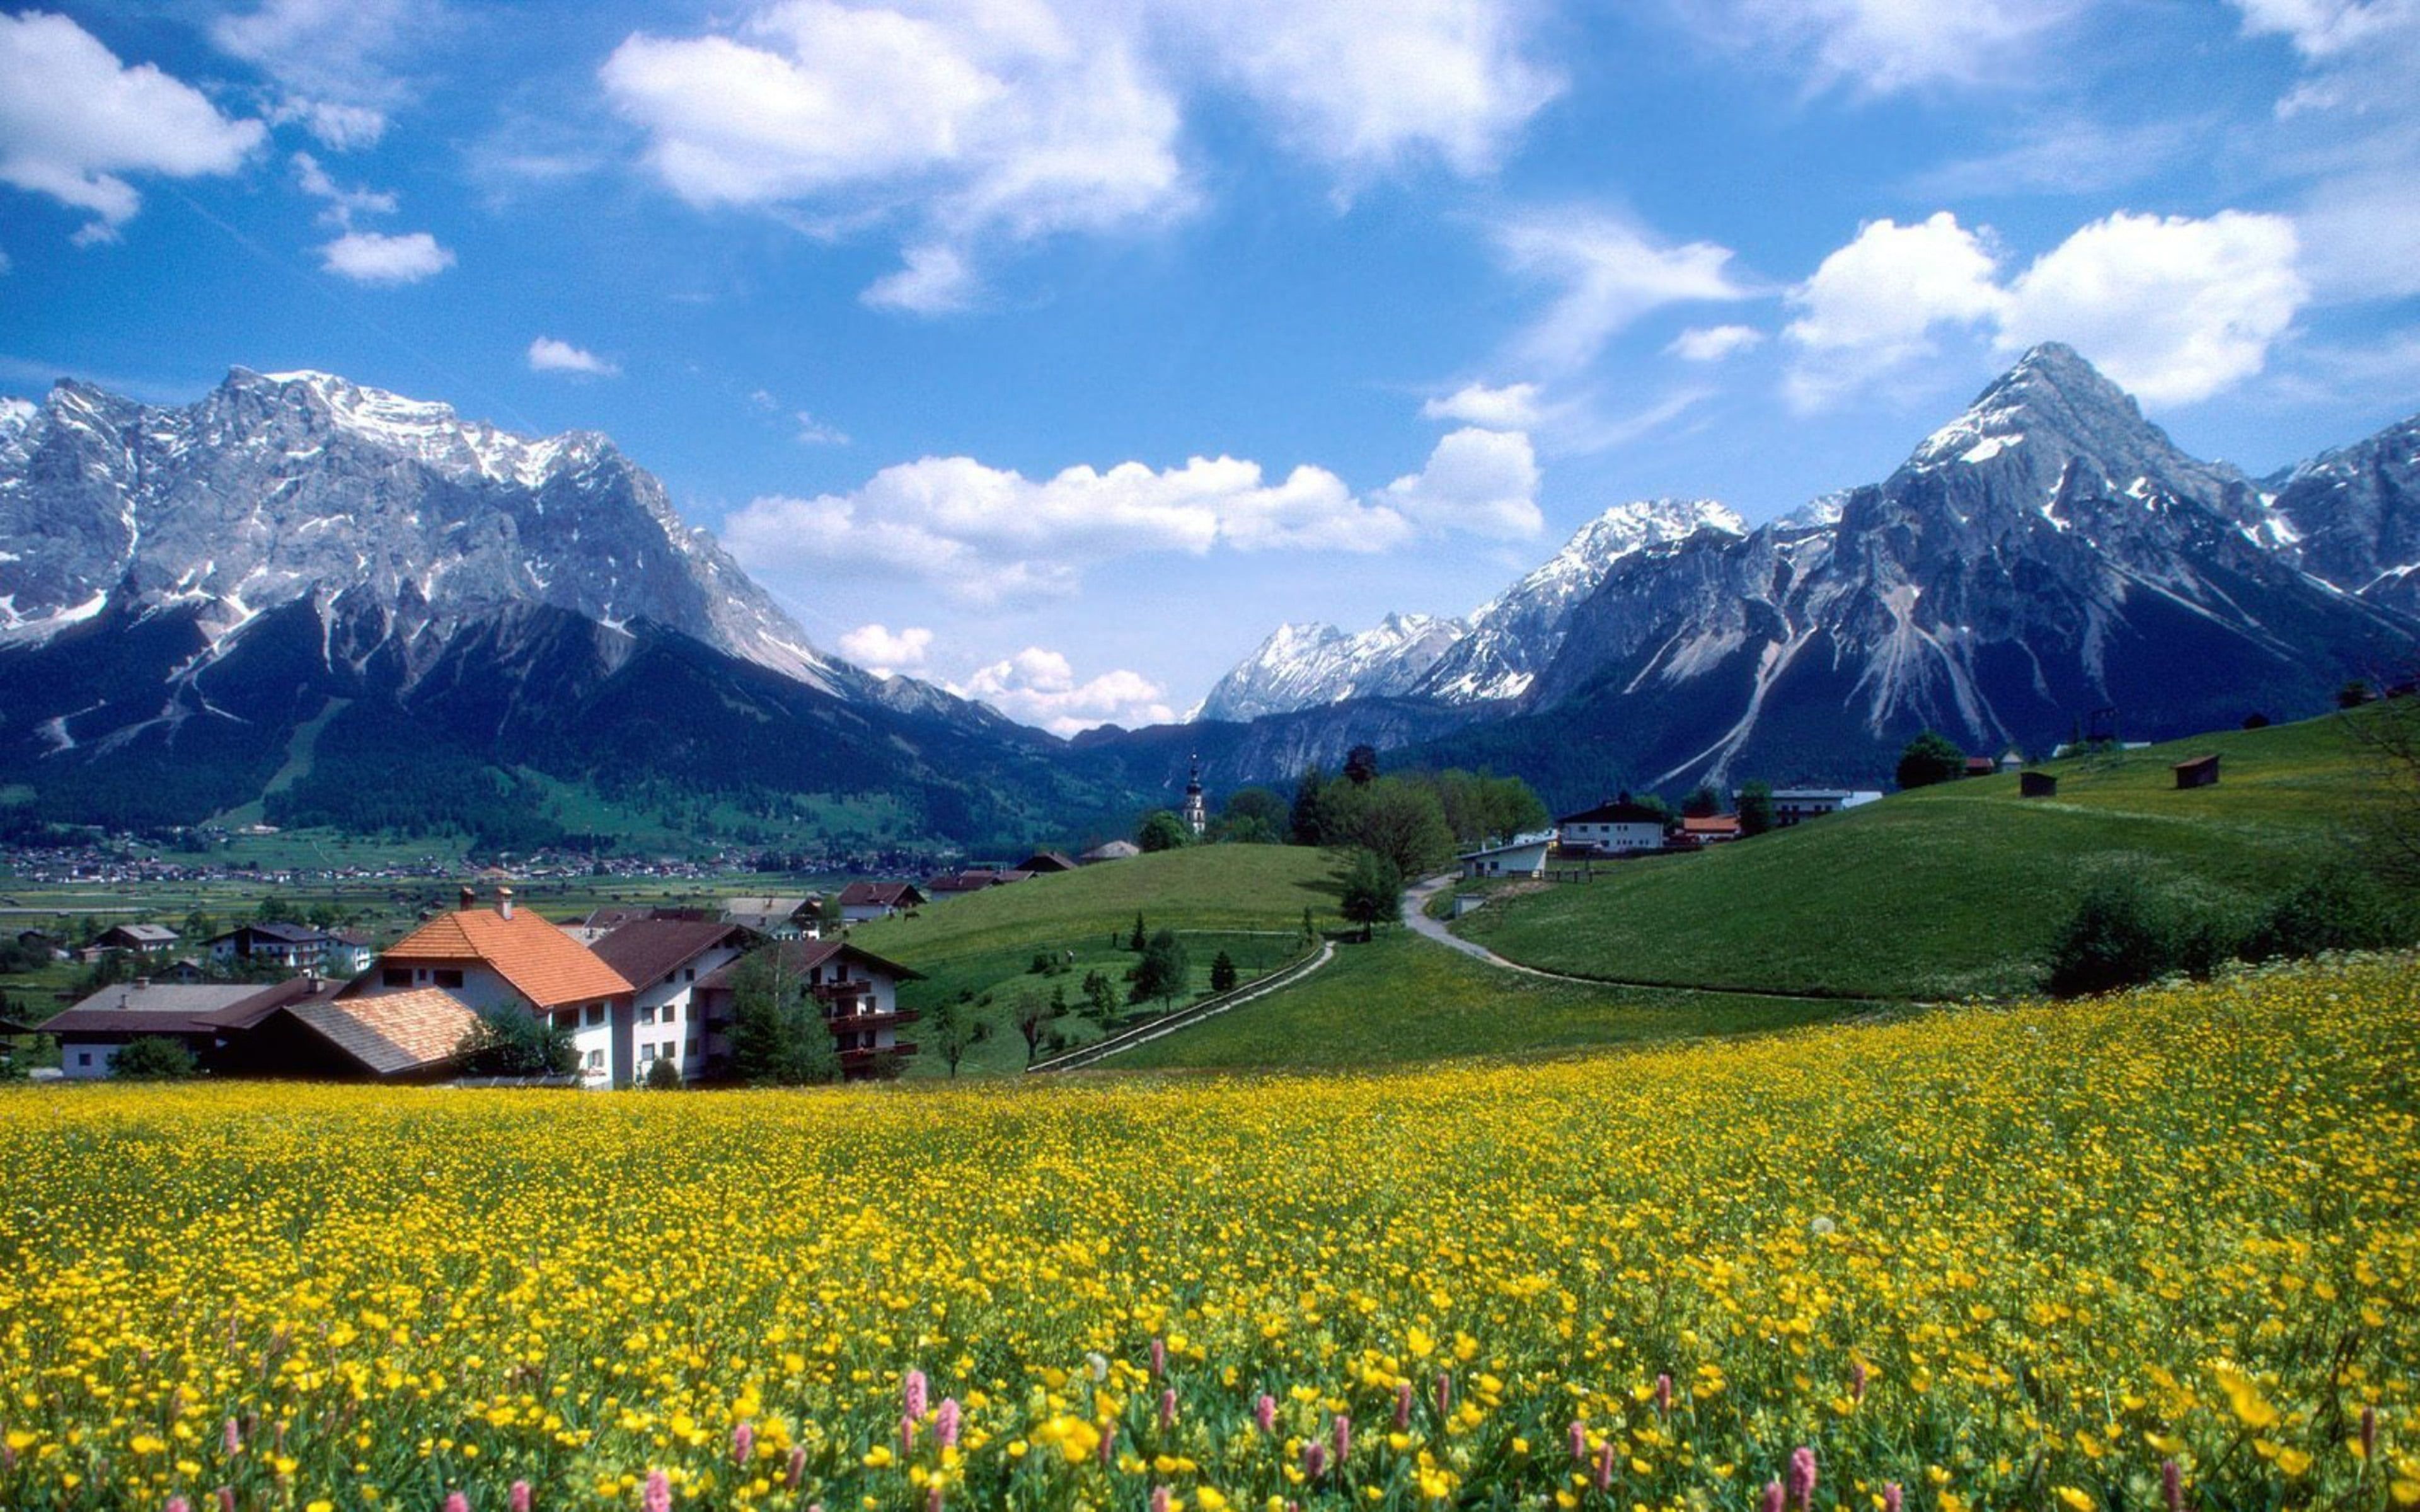 Zugspitze Bavaria In Germany Landscape Spring Mountain Village With Snow Mountains Meadow Flowers Sky. Germany landscape, HD nature wallpaper, Mountain wallpaper